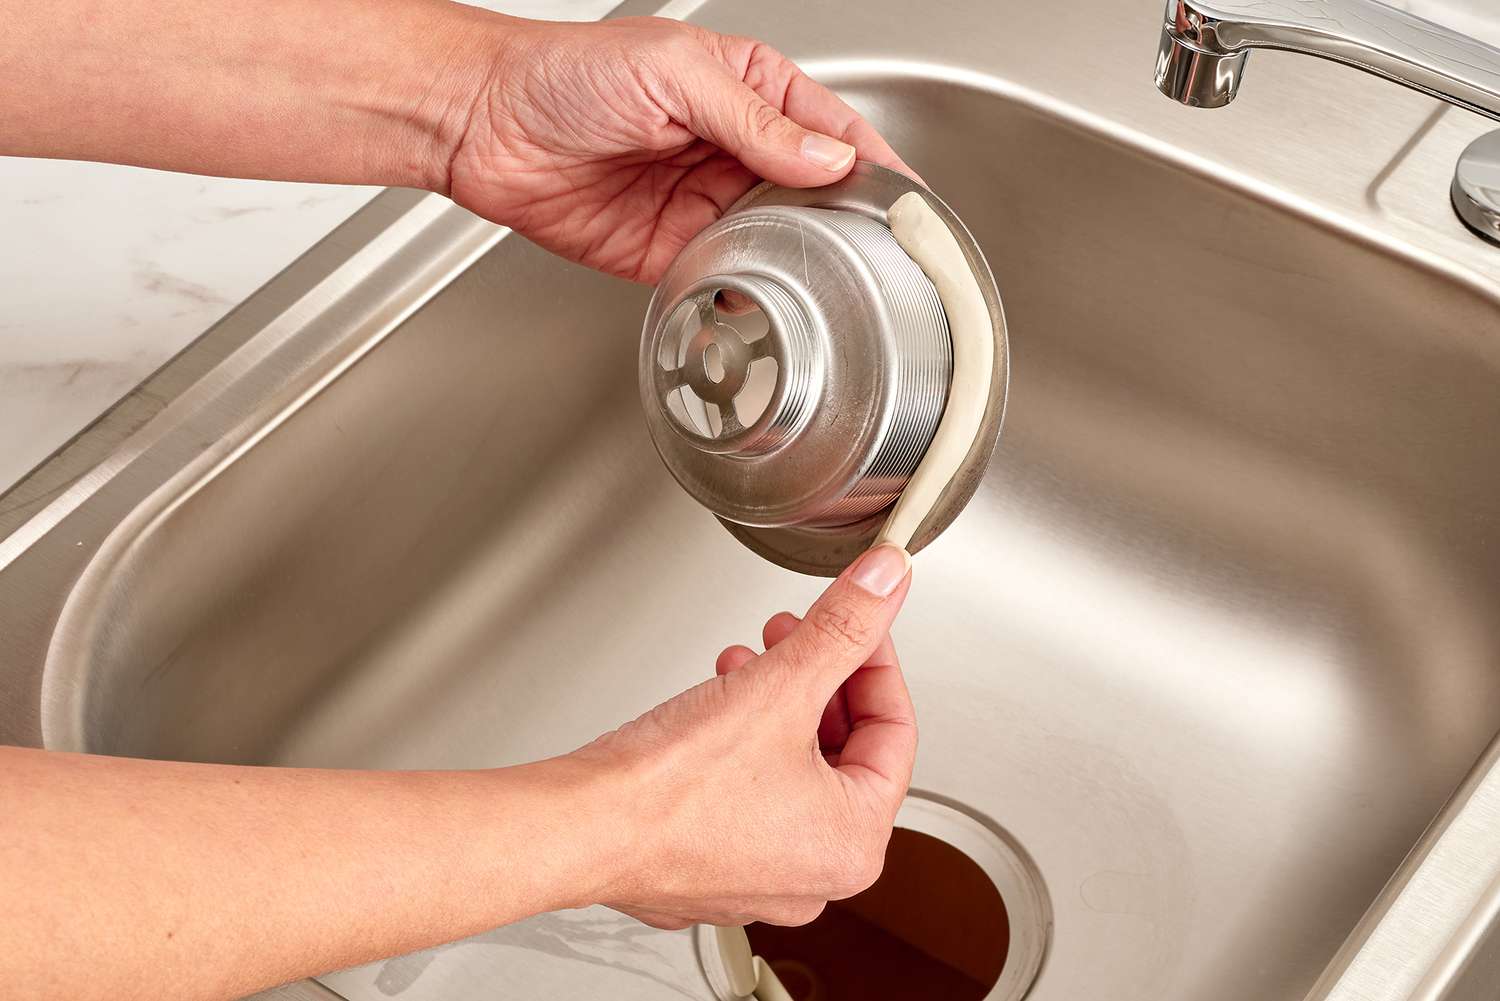 How To Use Plumbers Putty On Sink Drain